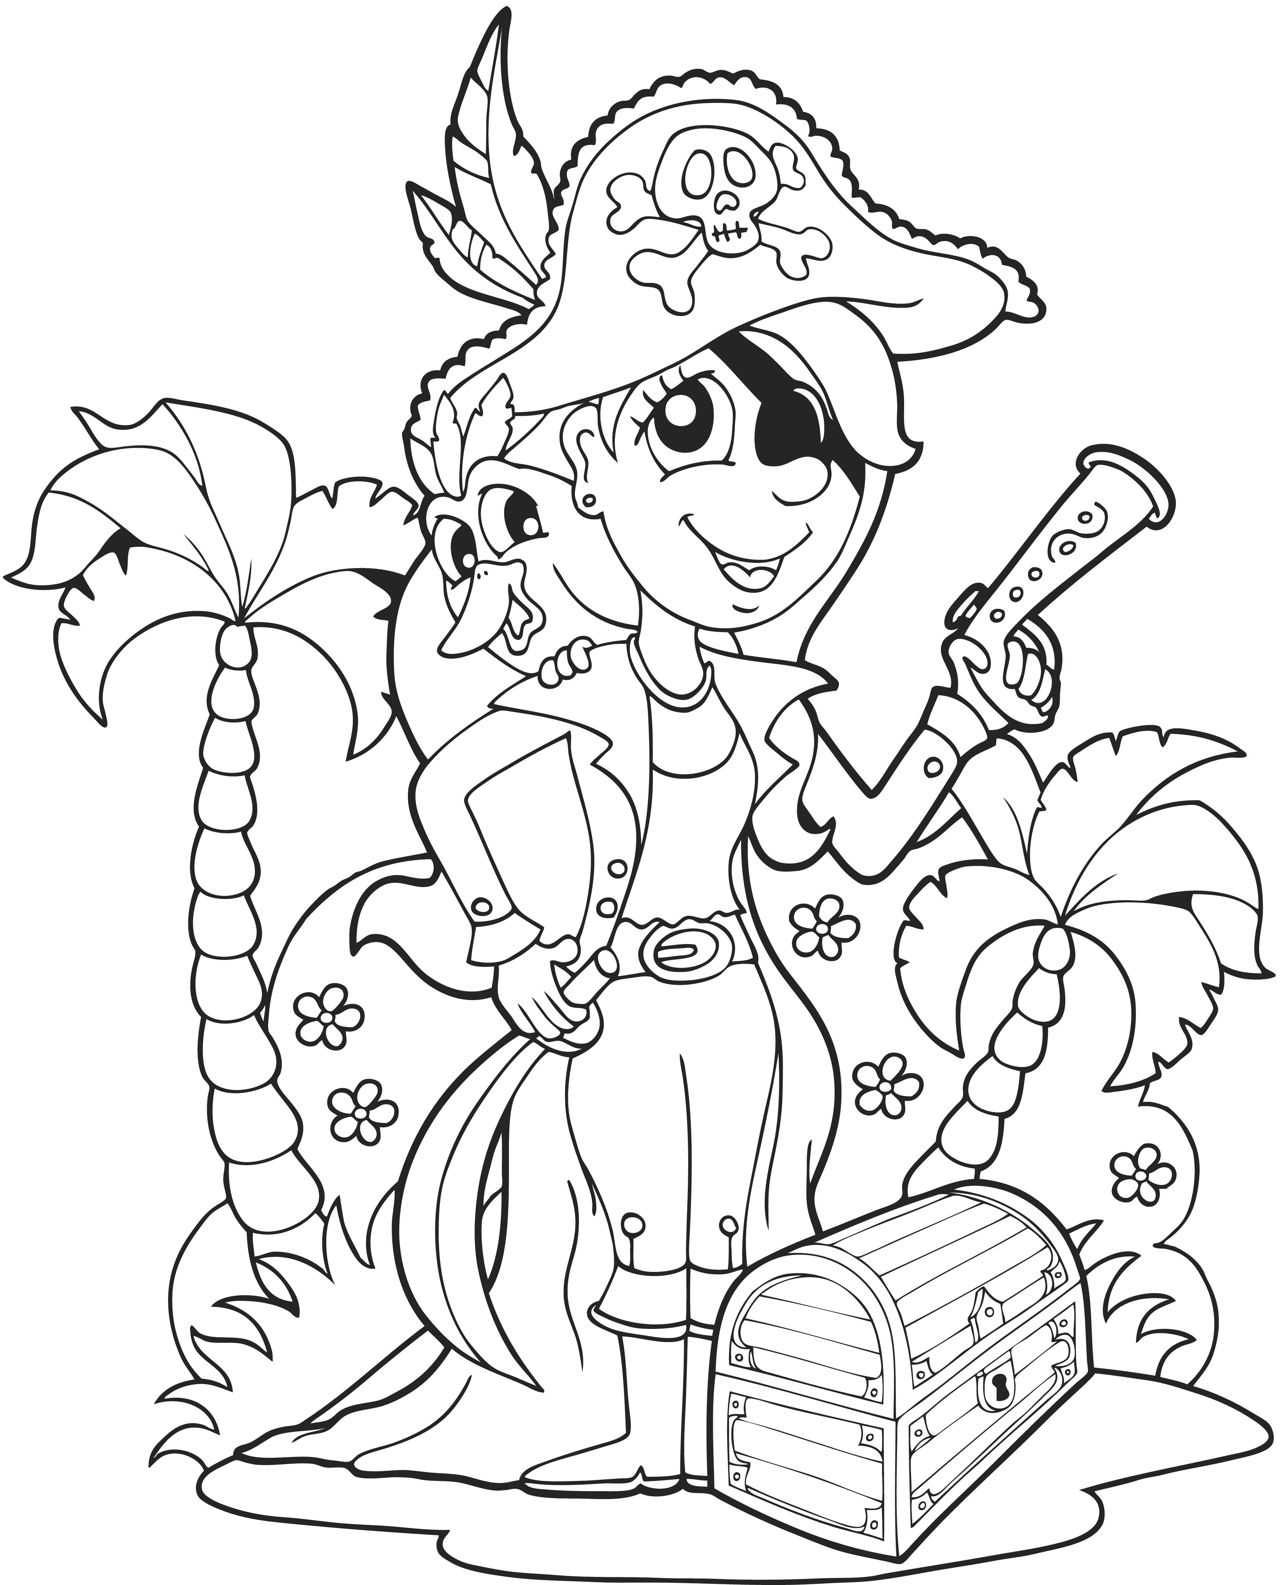 Wonderful Pirate Clip Art And Coloring Pages For Kids Art Hearty